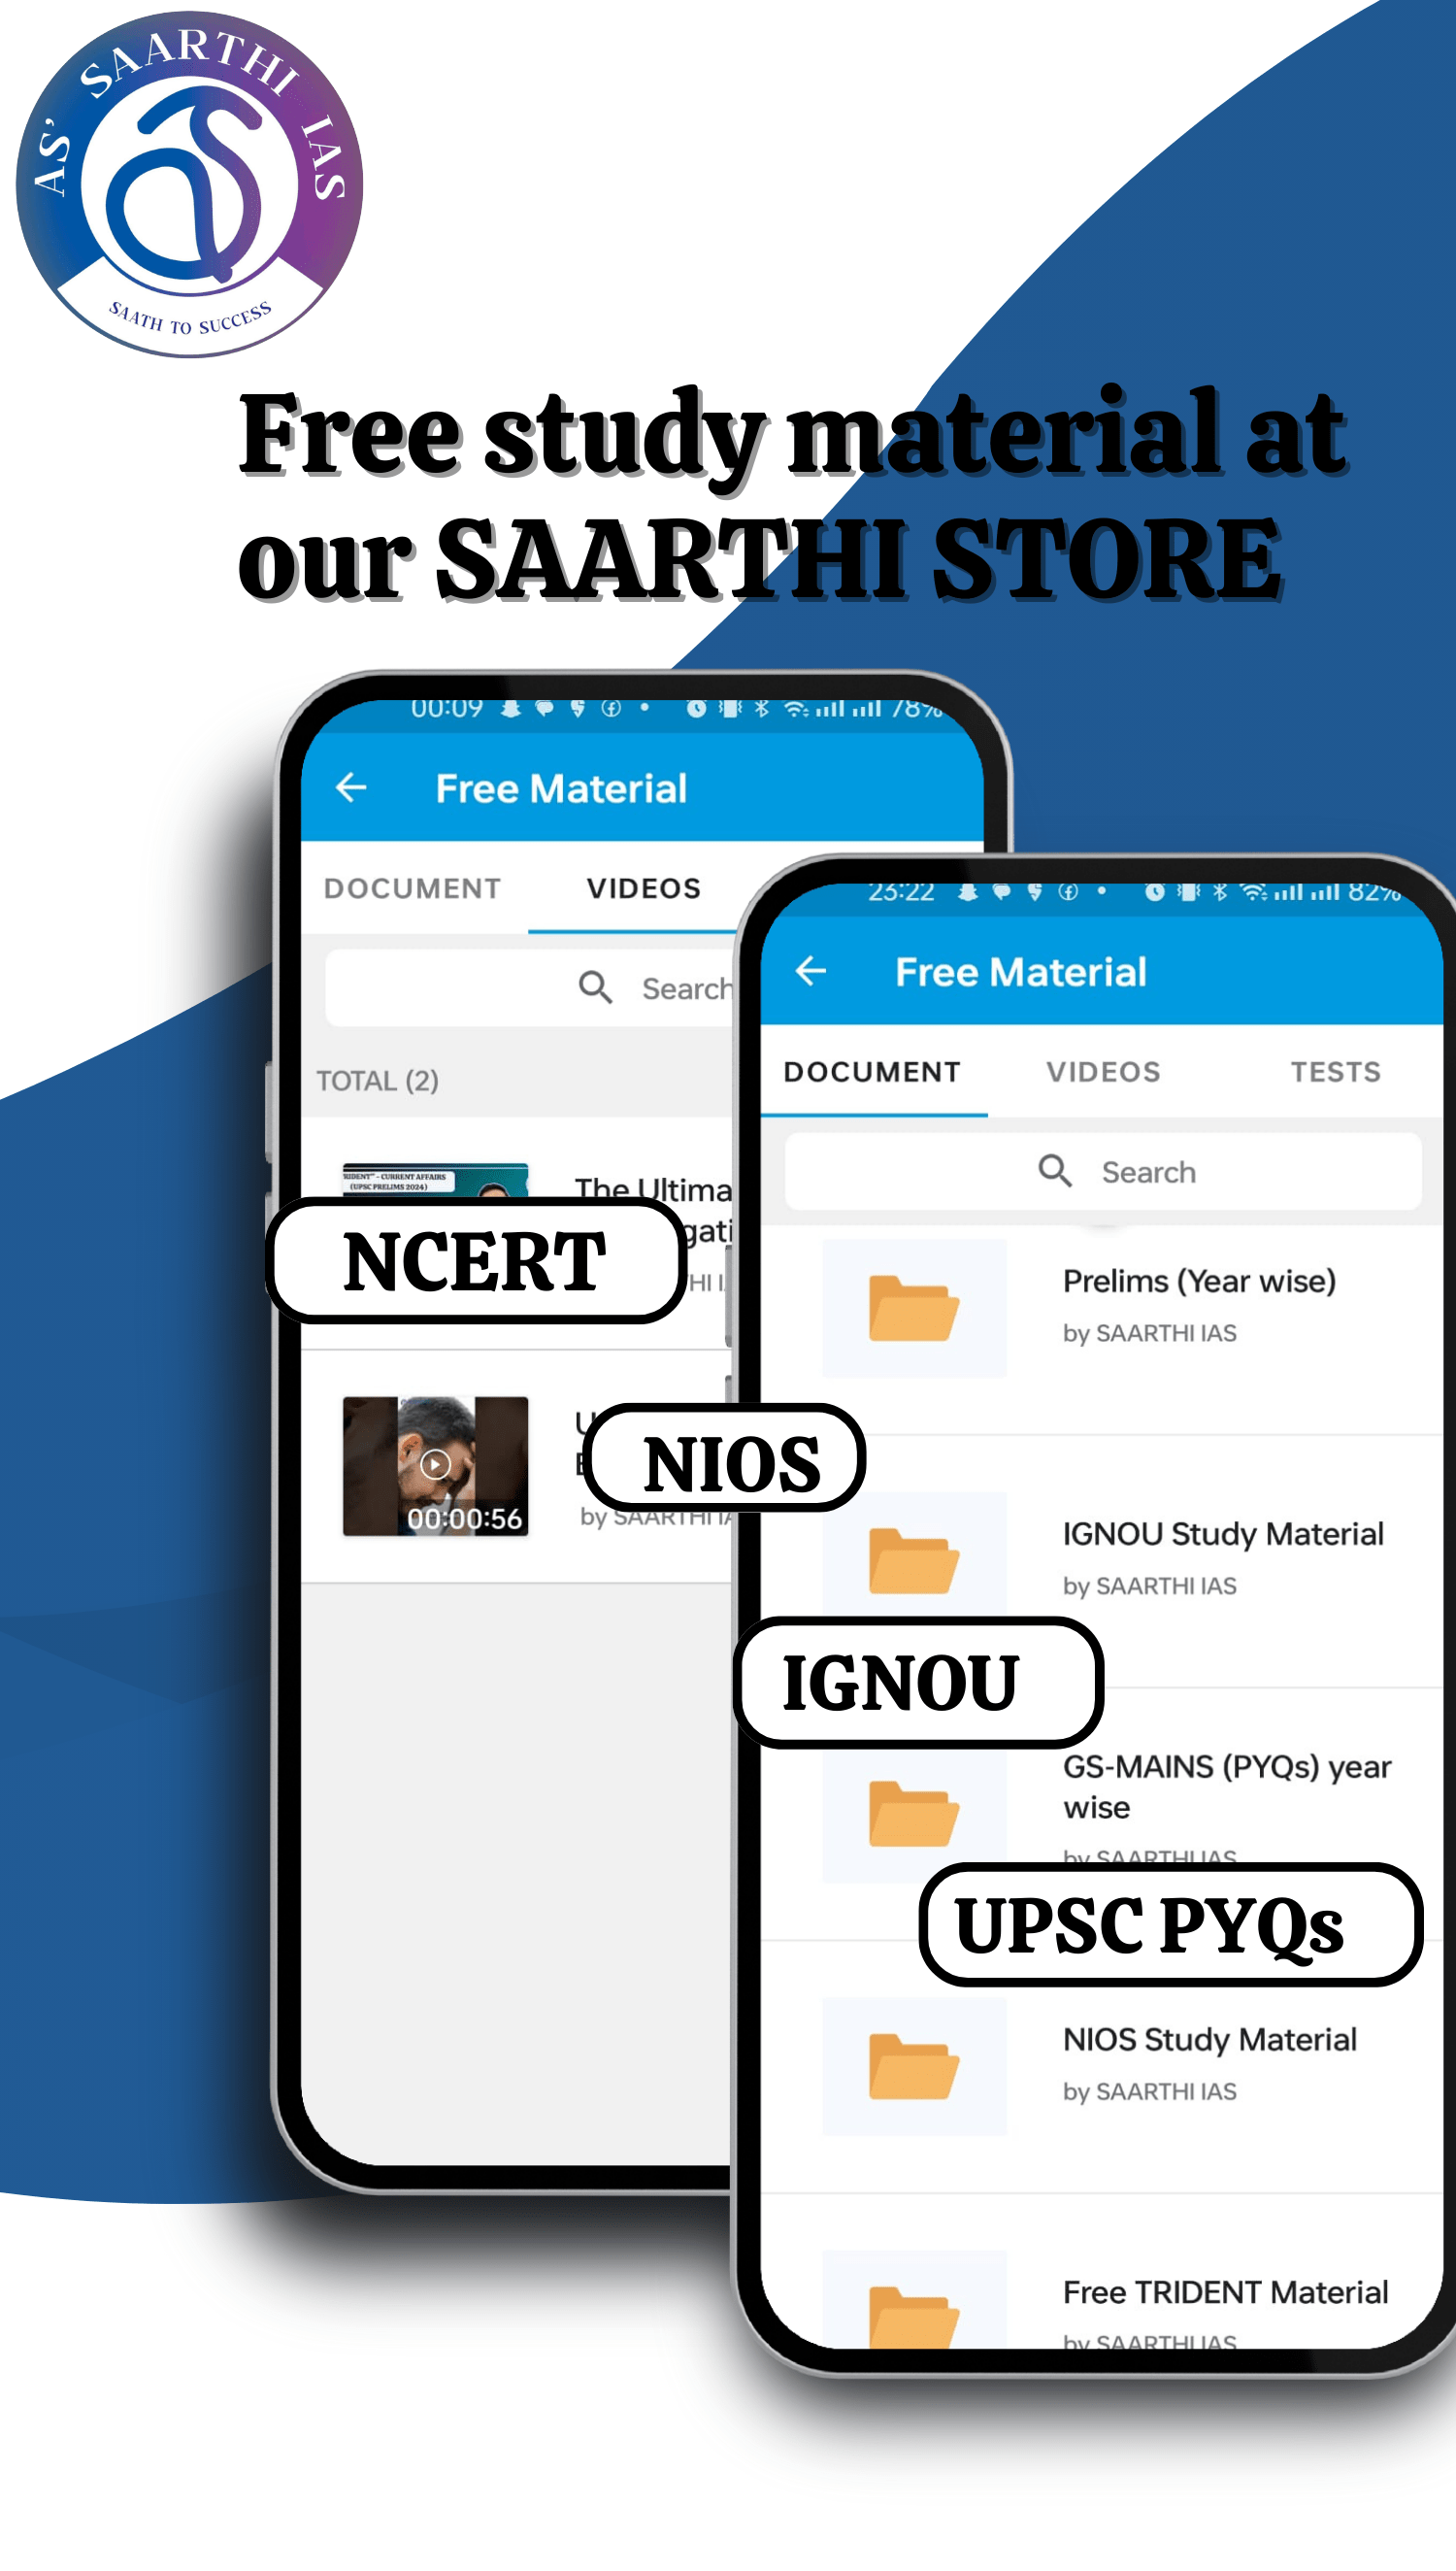 Download our SAARTHI IAS app to get Free UPSC Material